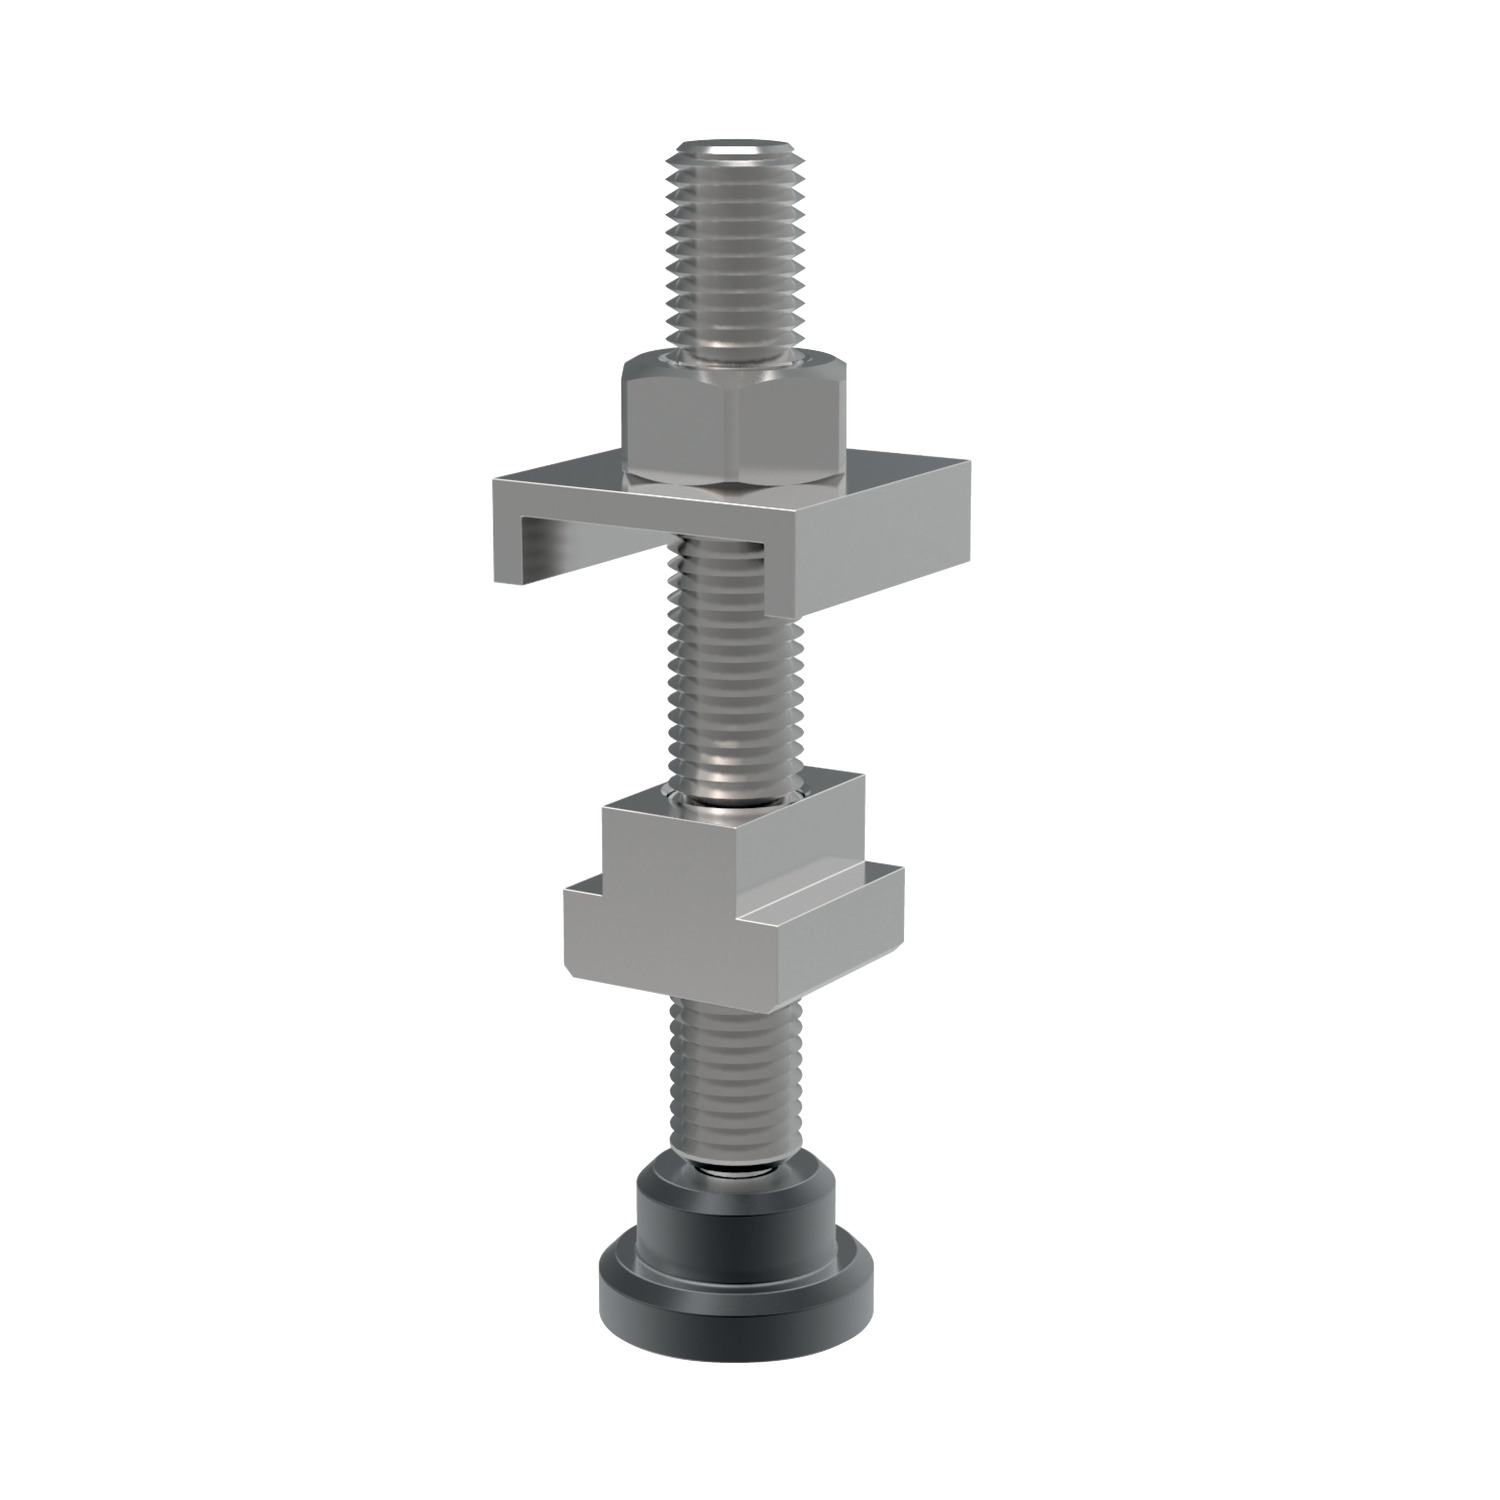 Product 45080, Self-Aligning Clamping Screw for open clamping arms / 